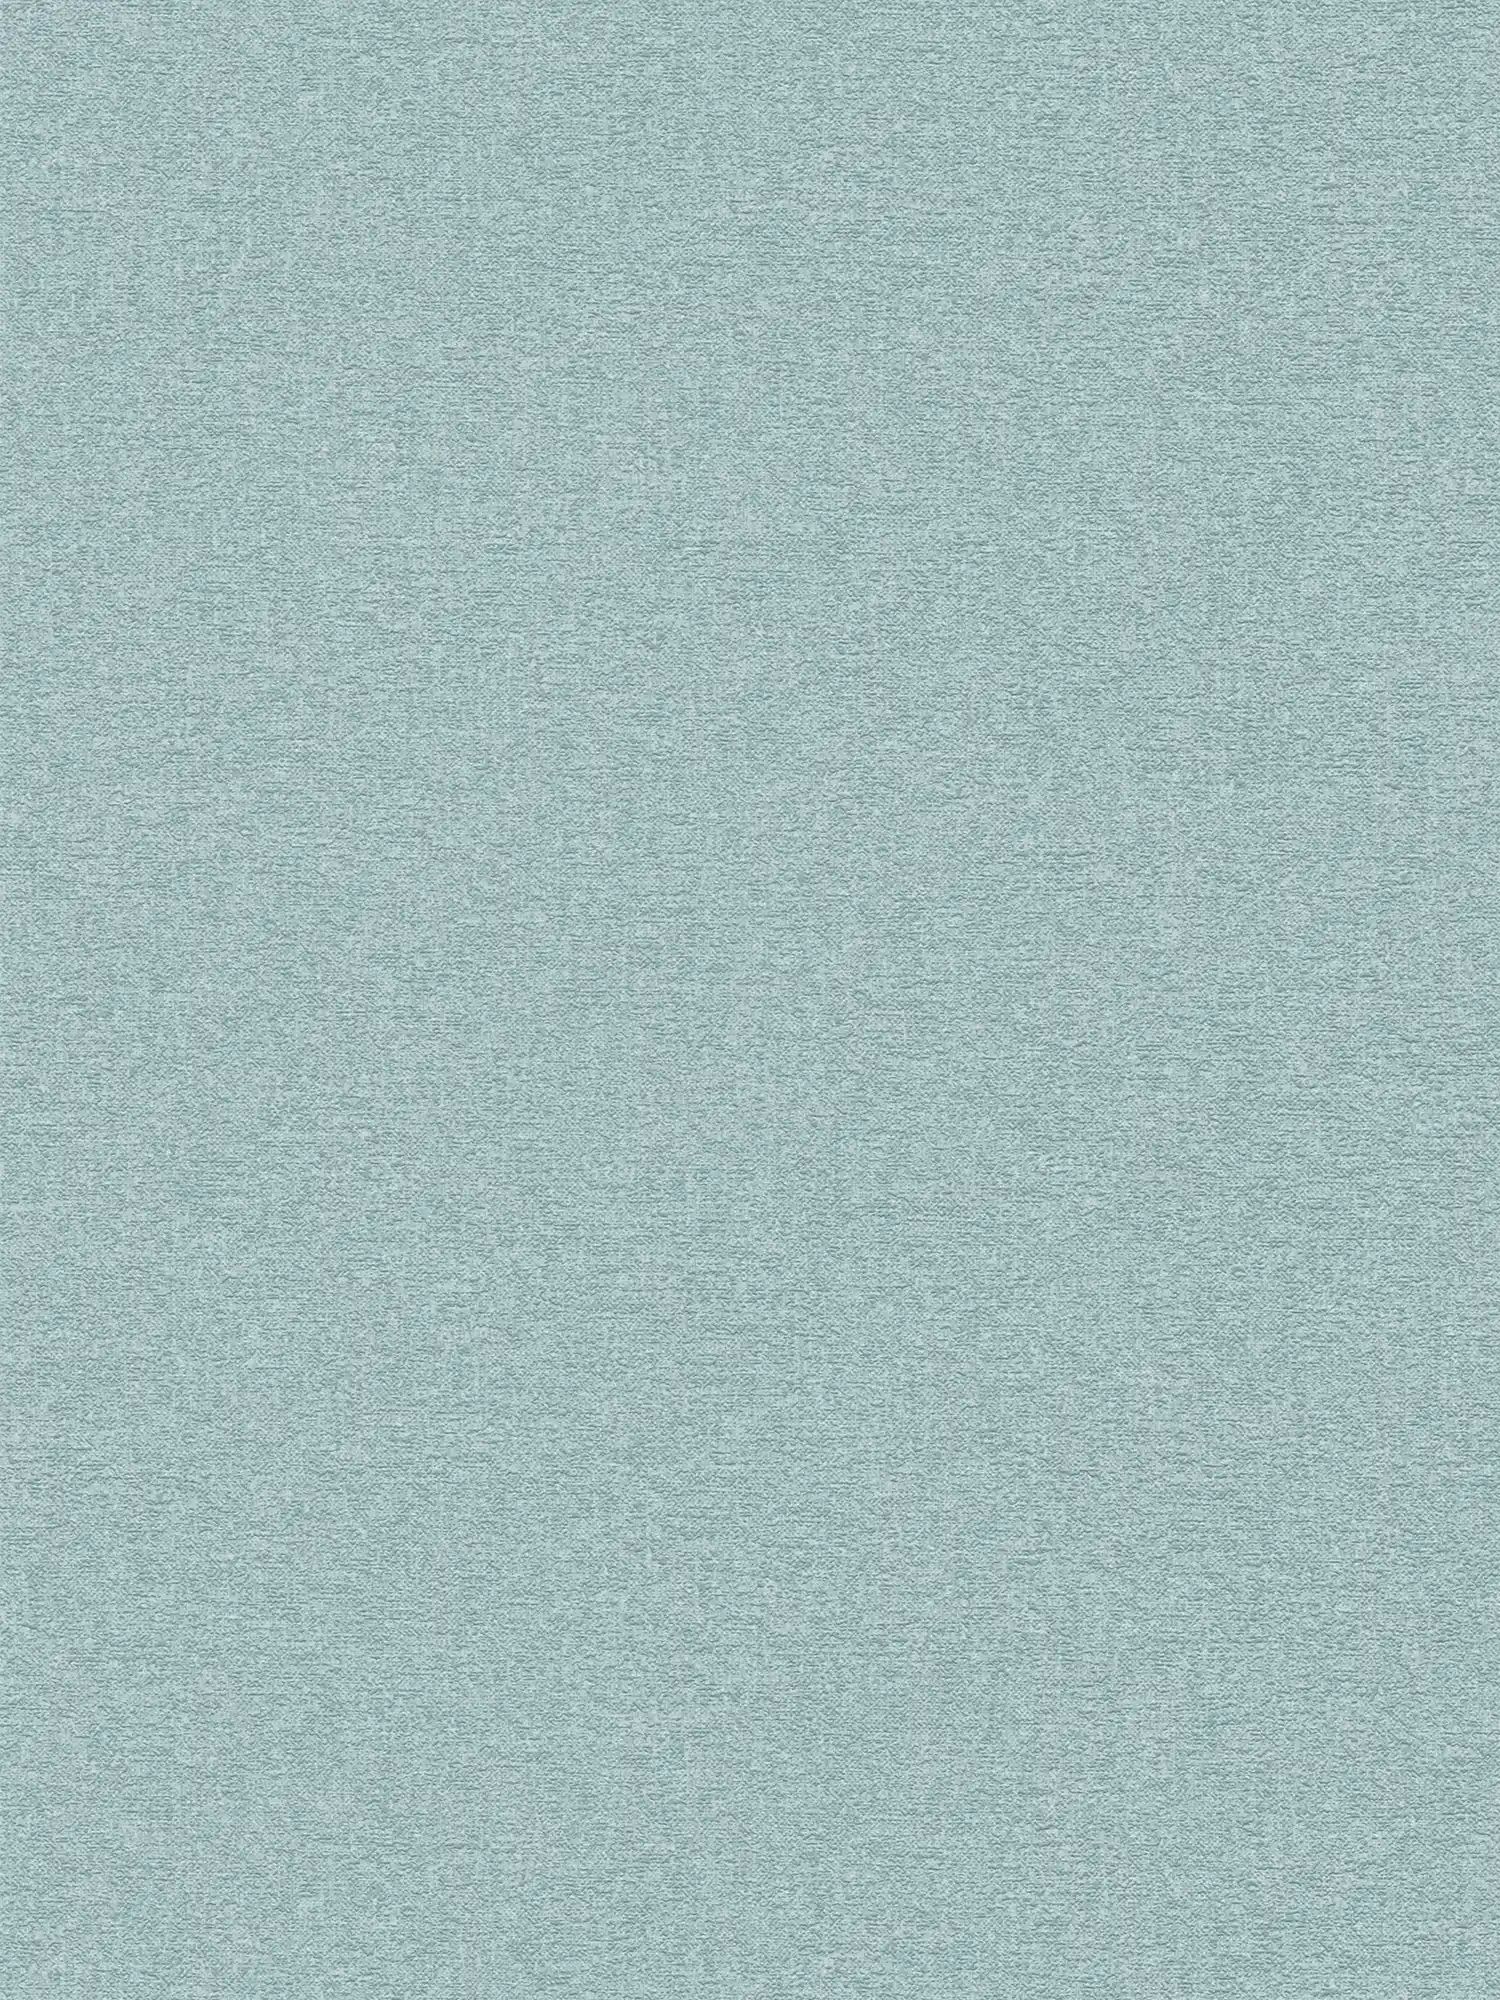 Plain wallpaper with textured pattern in maritime colours - blue
